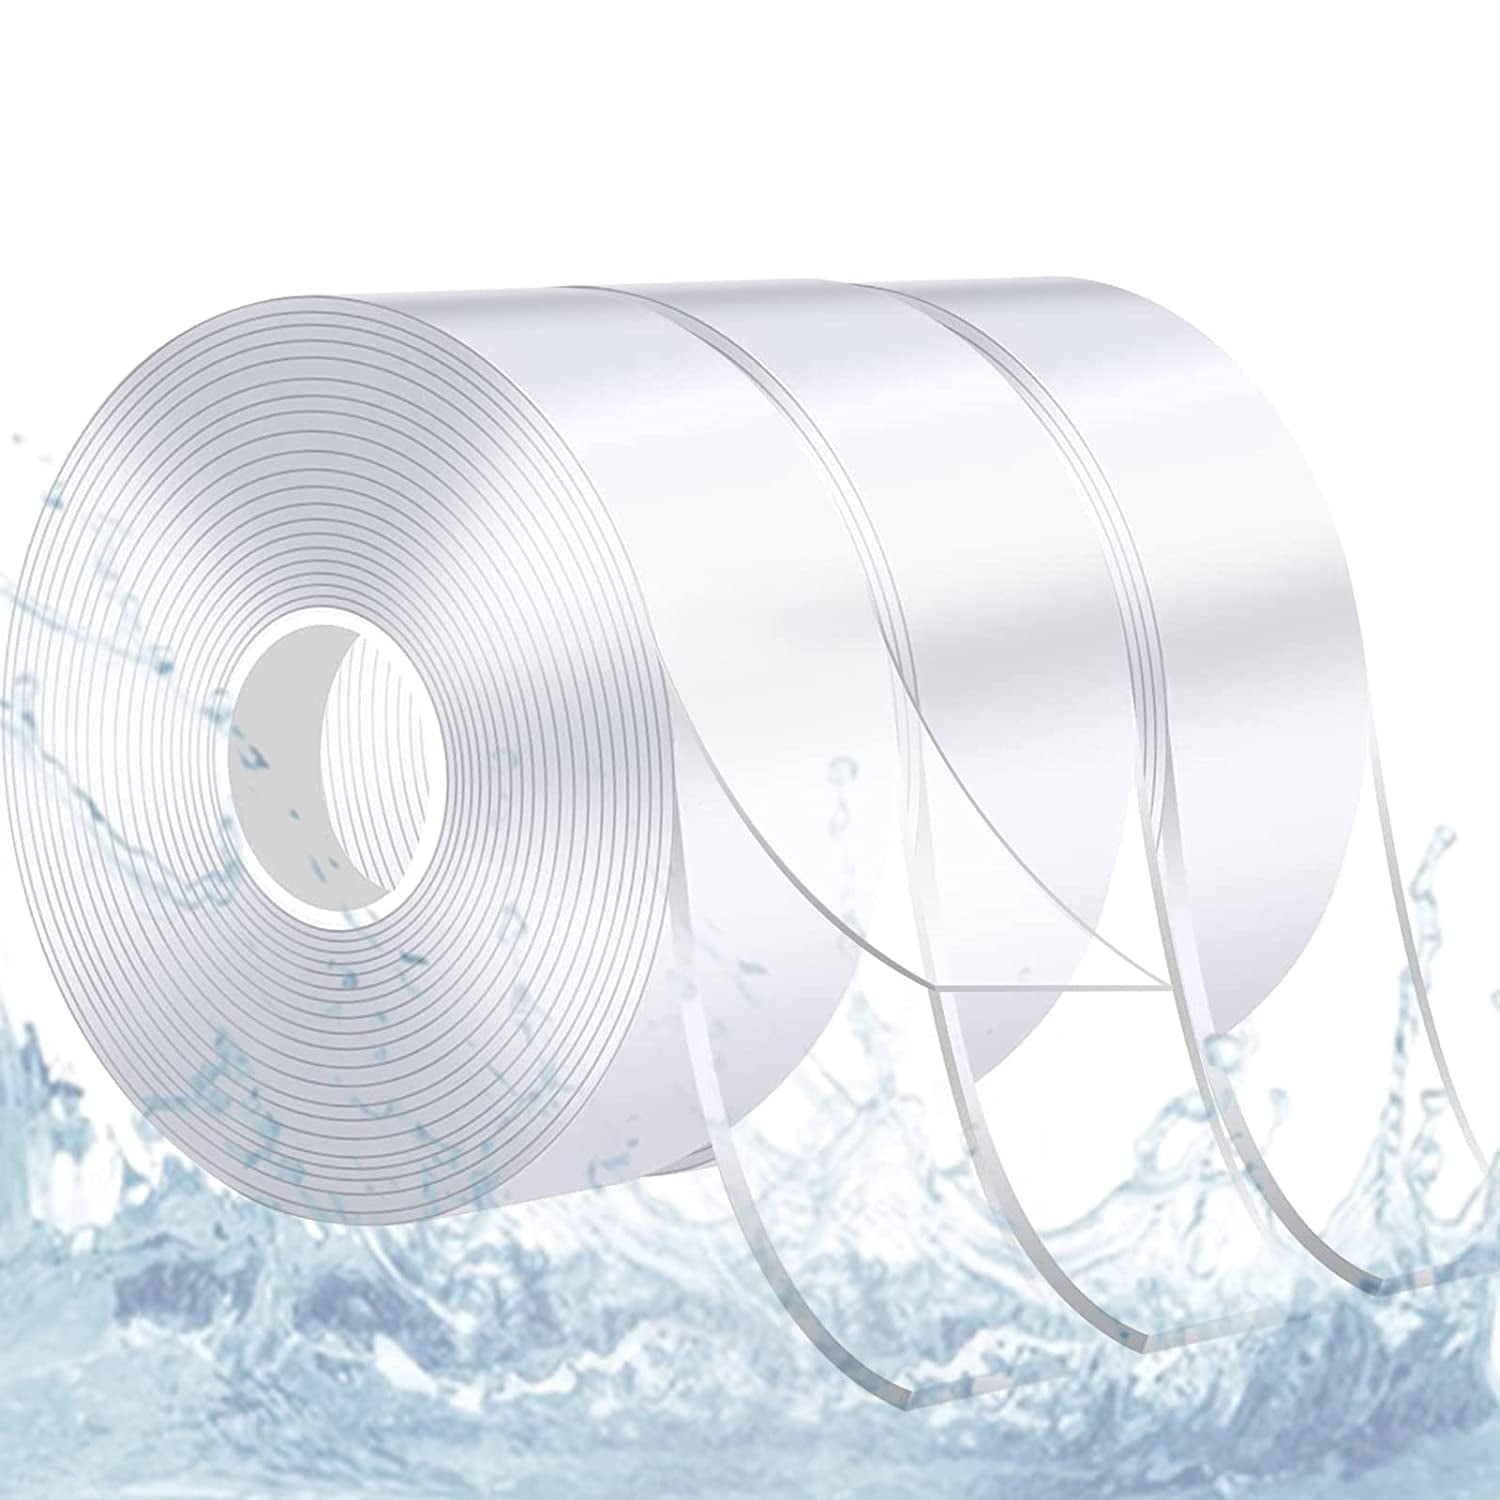 . Suitable for Home and Office Clear Tape That Can be Mounted on The Wall Without a Trace 2x9.8FT Nano Double-Sided Tape Washable and Reusable Double-Sided Tape for Crafts Multi-Purpose Tape